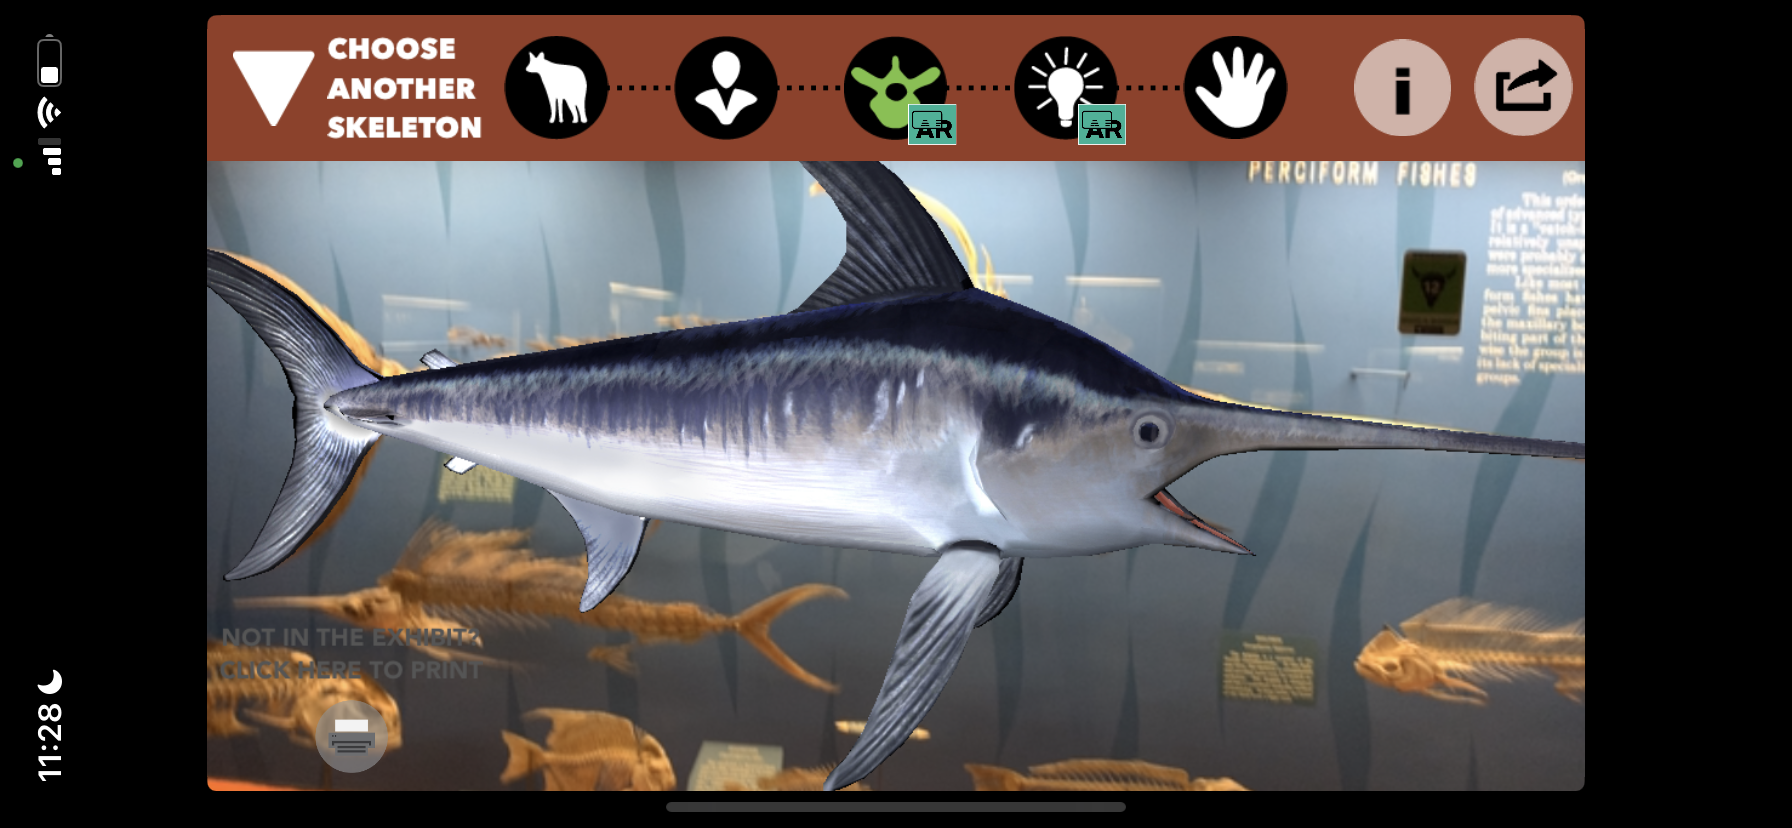 A screenshot of the interface when viewing the swordfish skeleton with the *Skin & Bones* app on an iPhone. There is an illustration of a living swordfish superimposed on the skeleton, in the same position that the skeleton is in. Along the top of the interface, there are several icons. There is an icon representing an animal, an icon representing a person, an icon of a vertebra with an “AR” tag next to it, an icon of a lightbulb with an “AR” tag next to it, and finally an icon of a hand. There is also an option to “Choose another skeleton,” plus “information” and “share” logos.